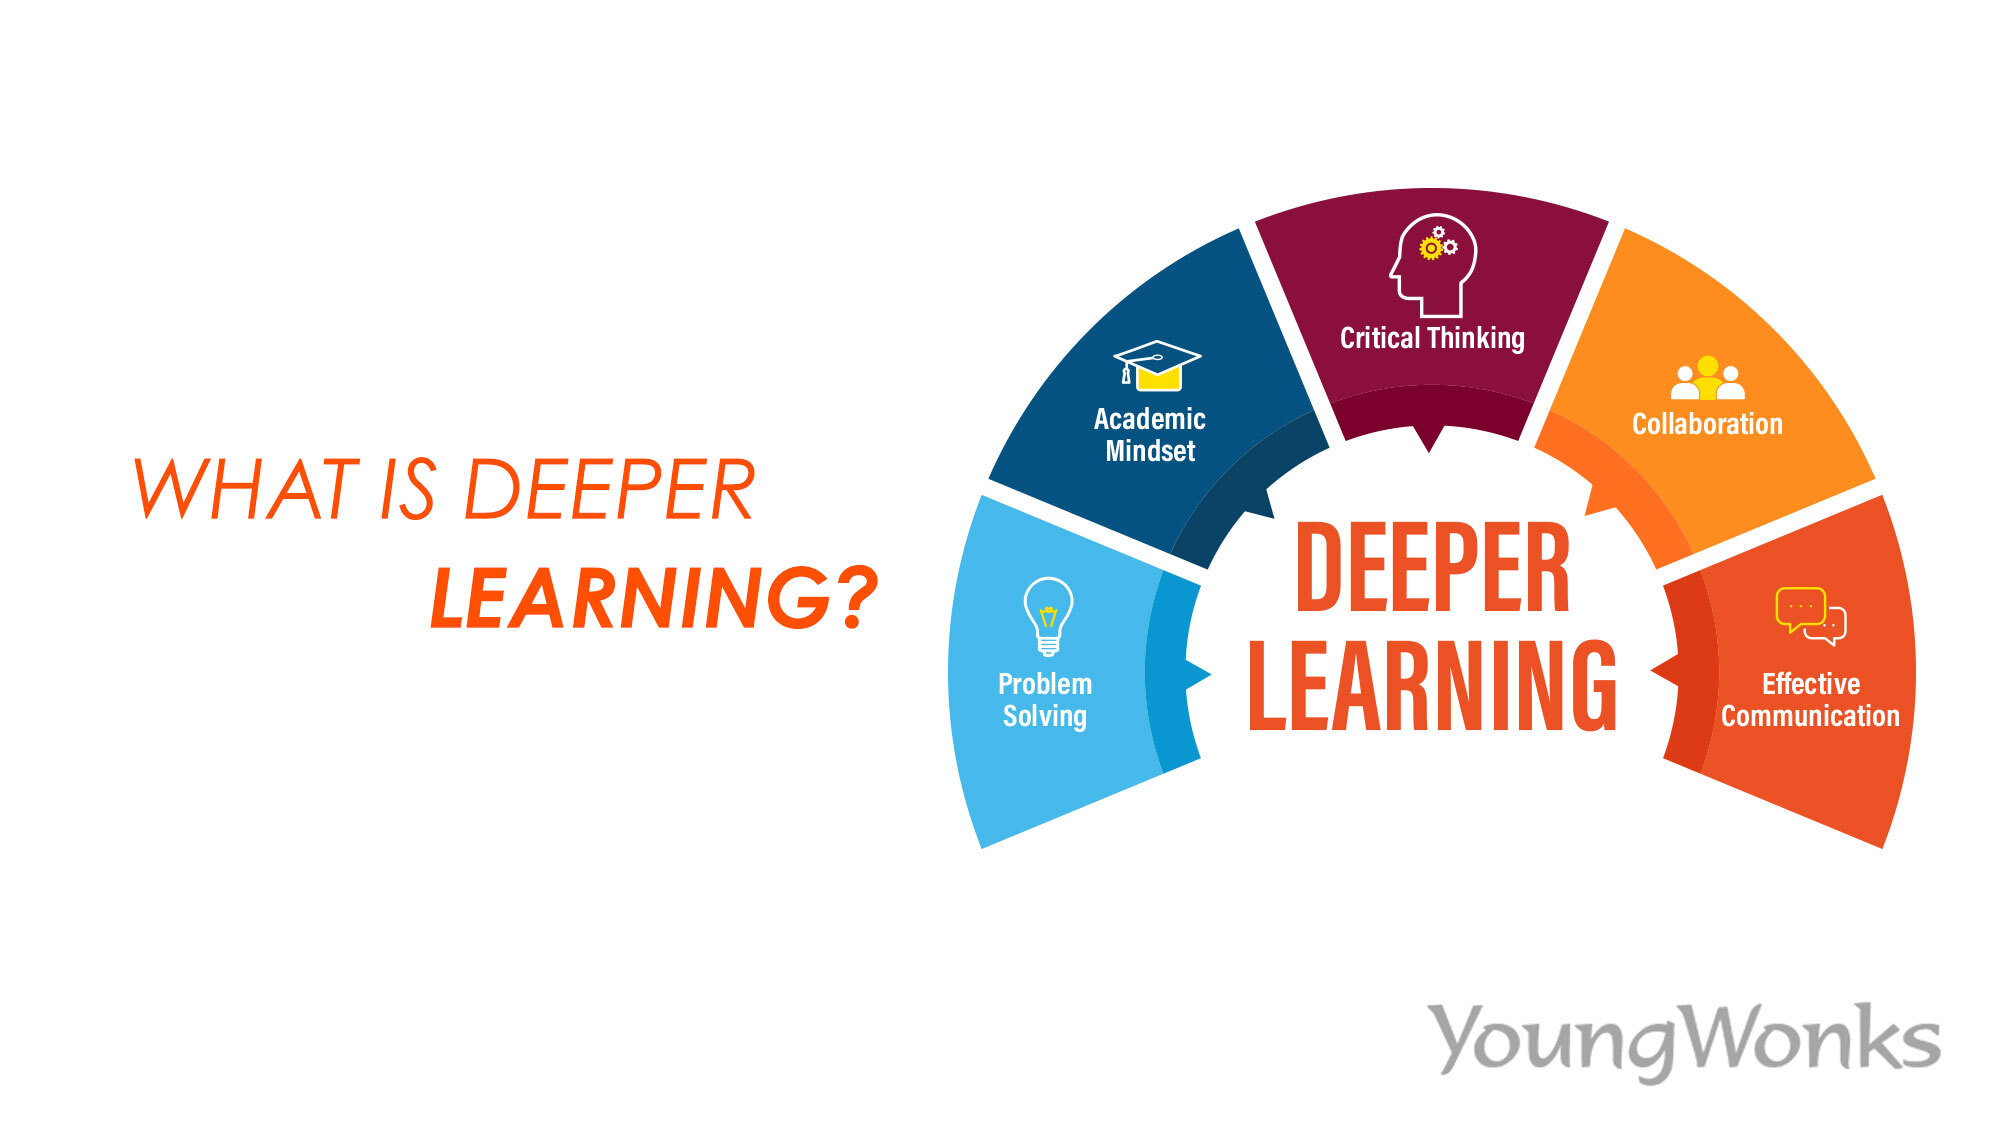 What is Deeper Learning?